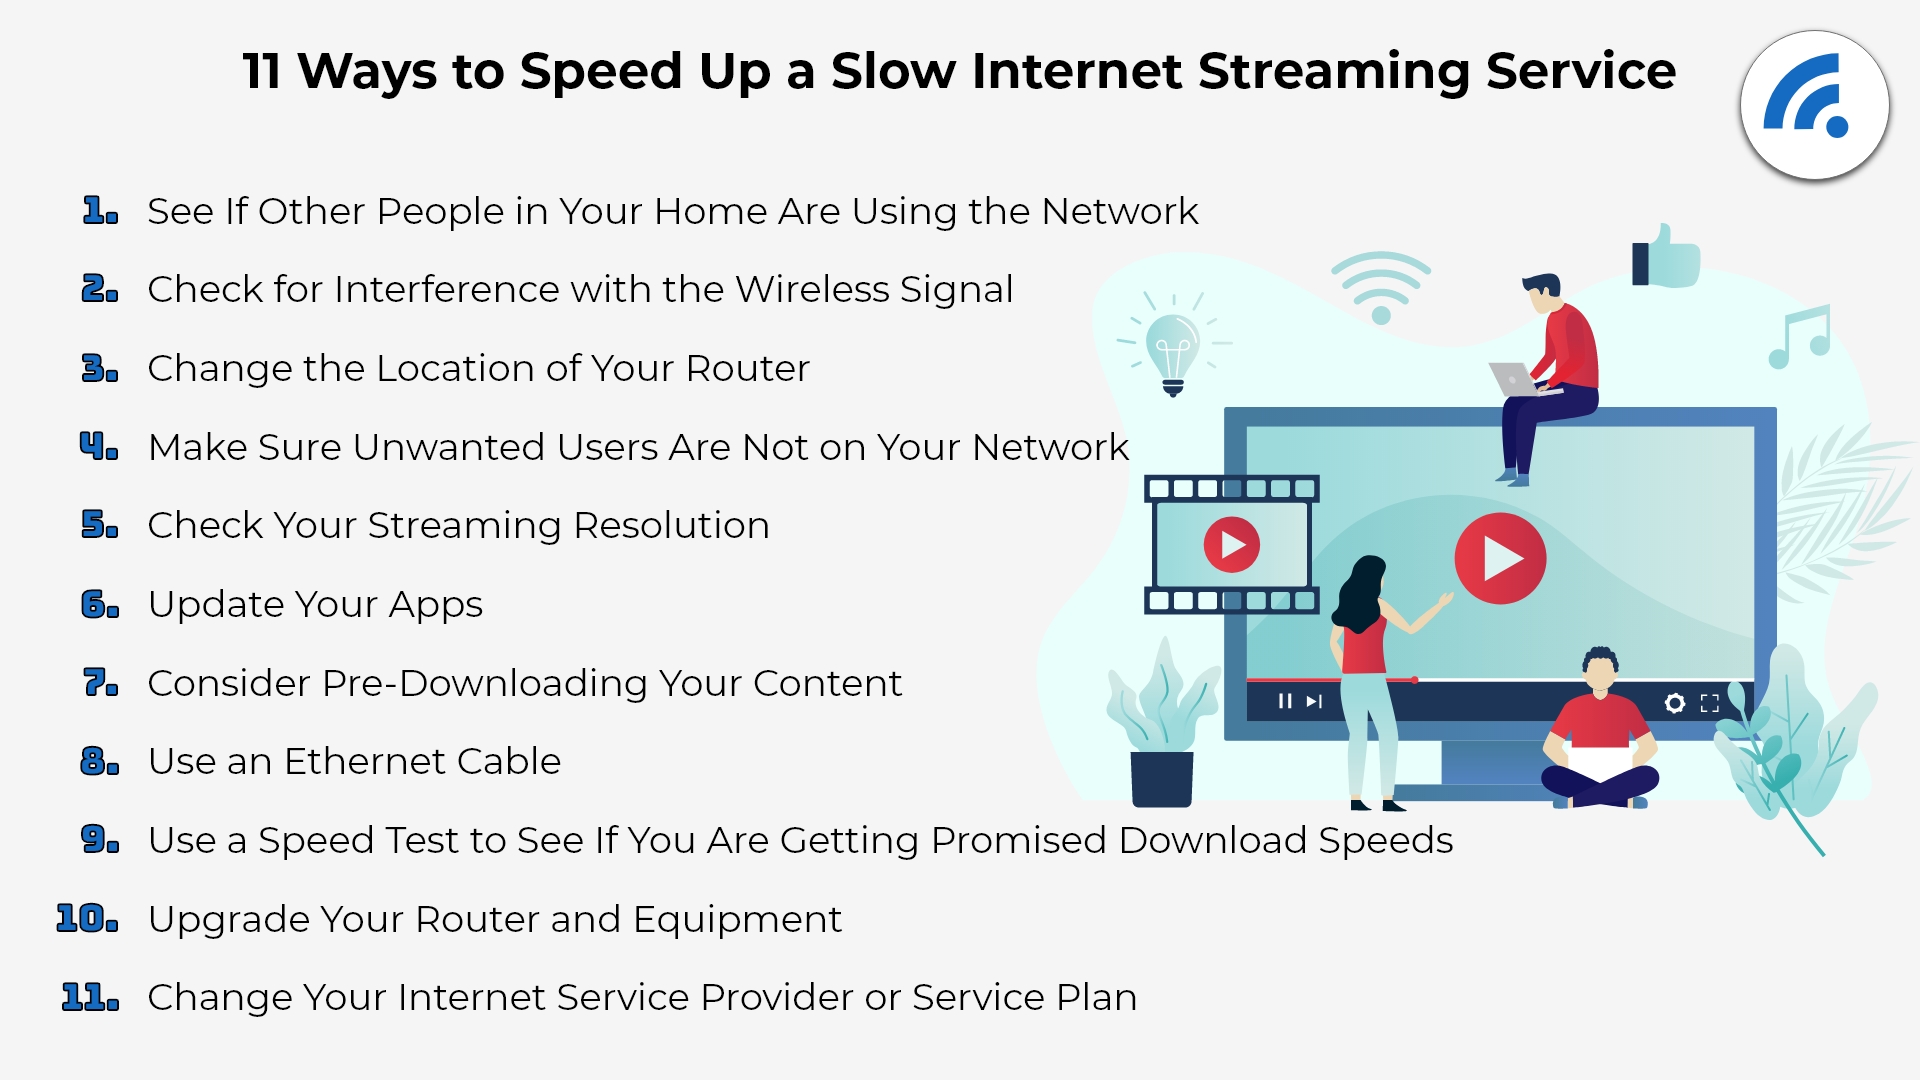 11 Ways to Speed Up a Slow Internet Streaming Service